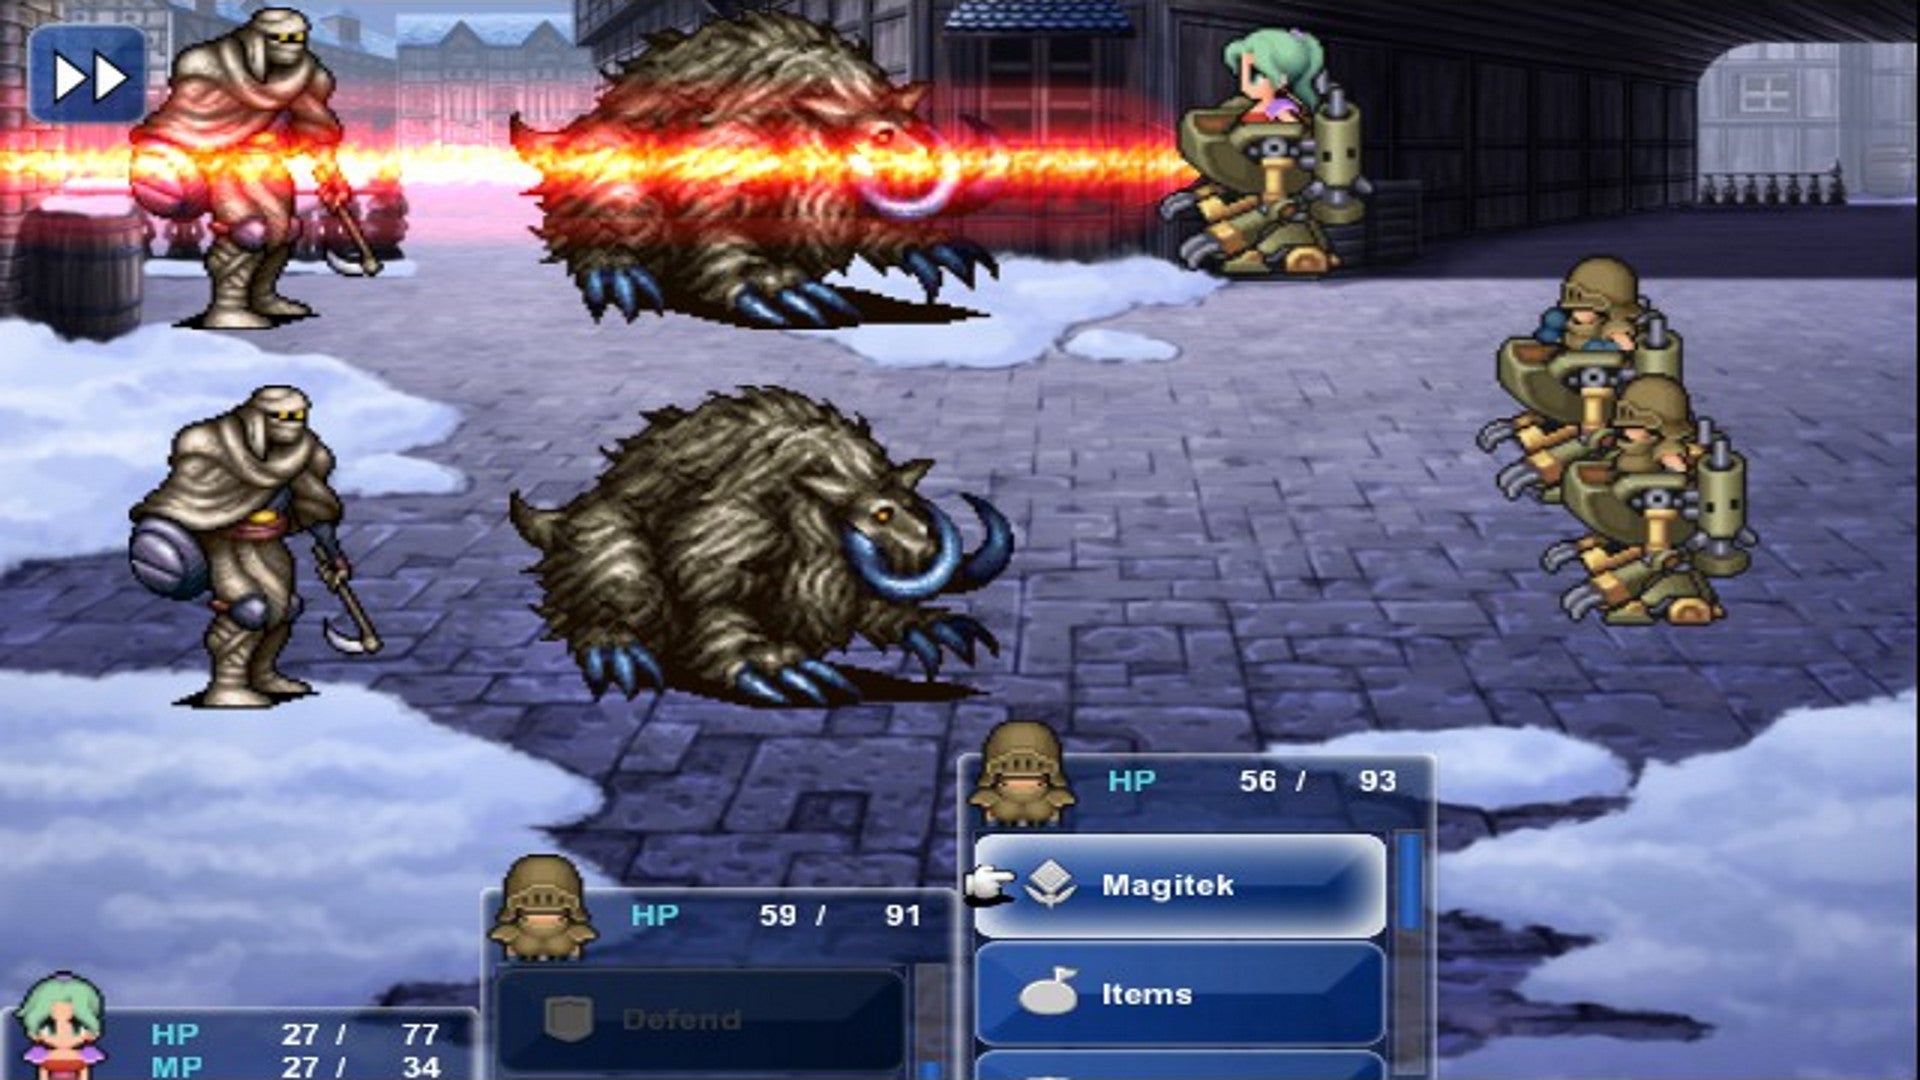 Image for Final Fantasy 6 is coming to Steam next week.